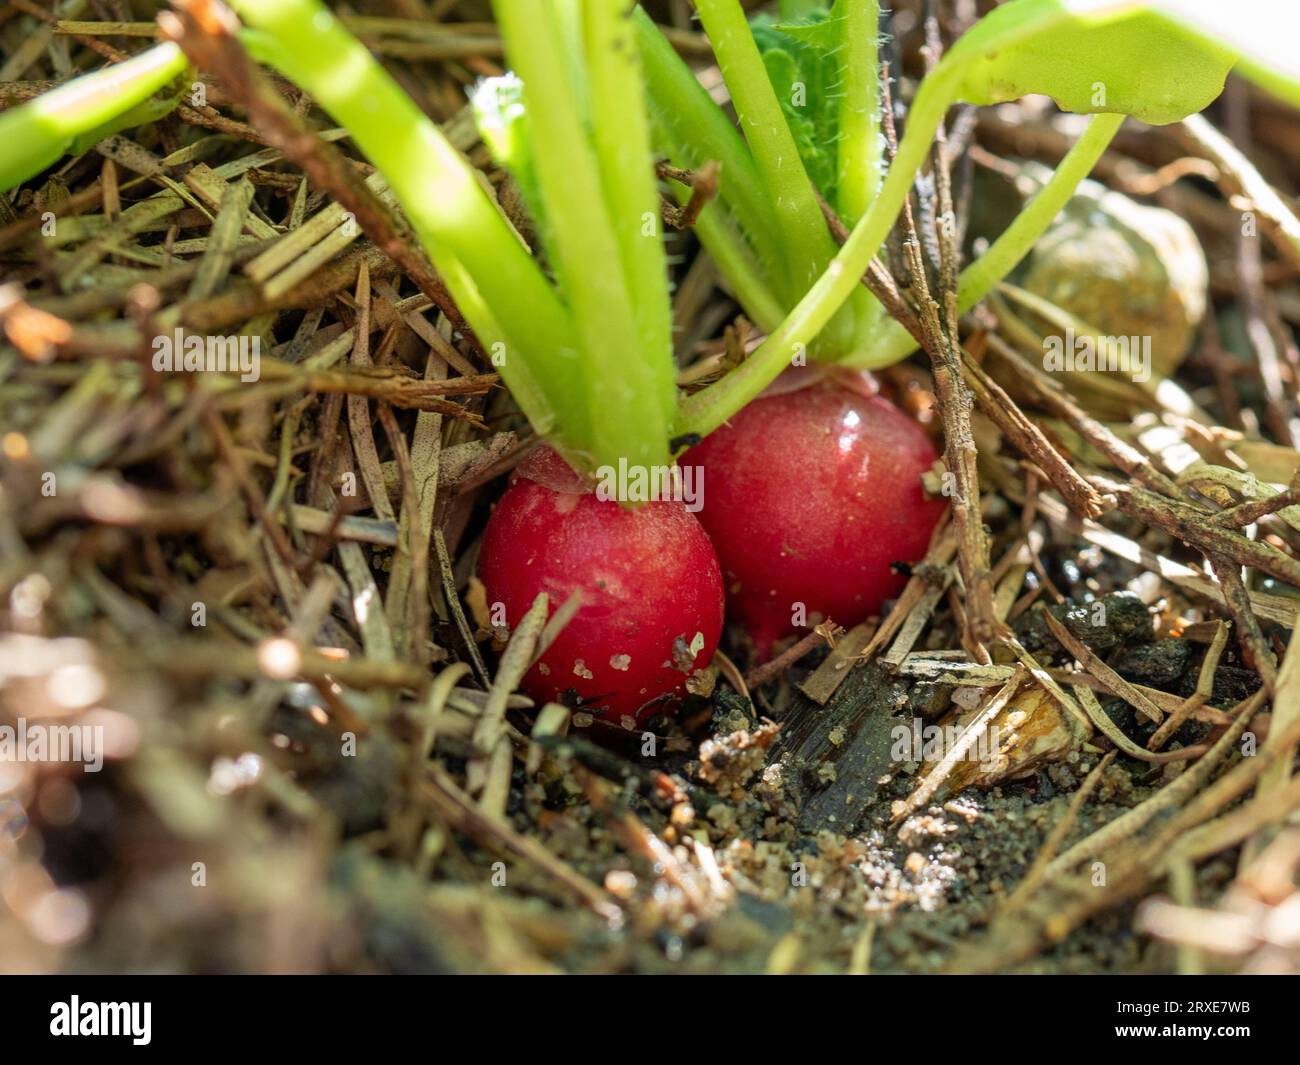 Two red Radishes with green tops being pulled from the dirt in the vegetable garden bed Stock Photo